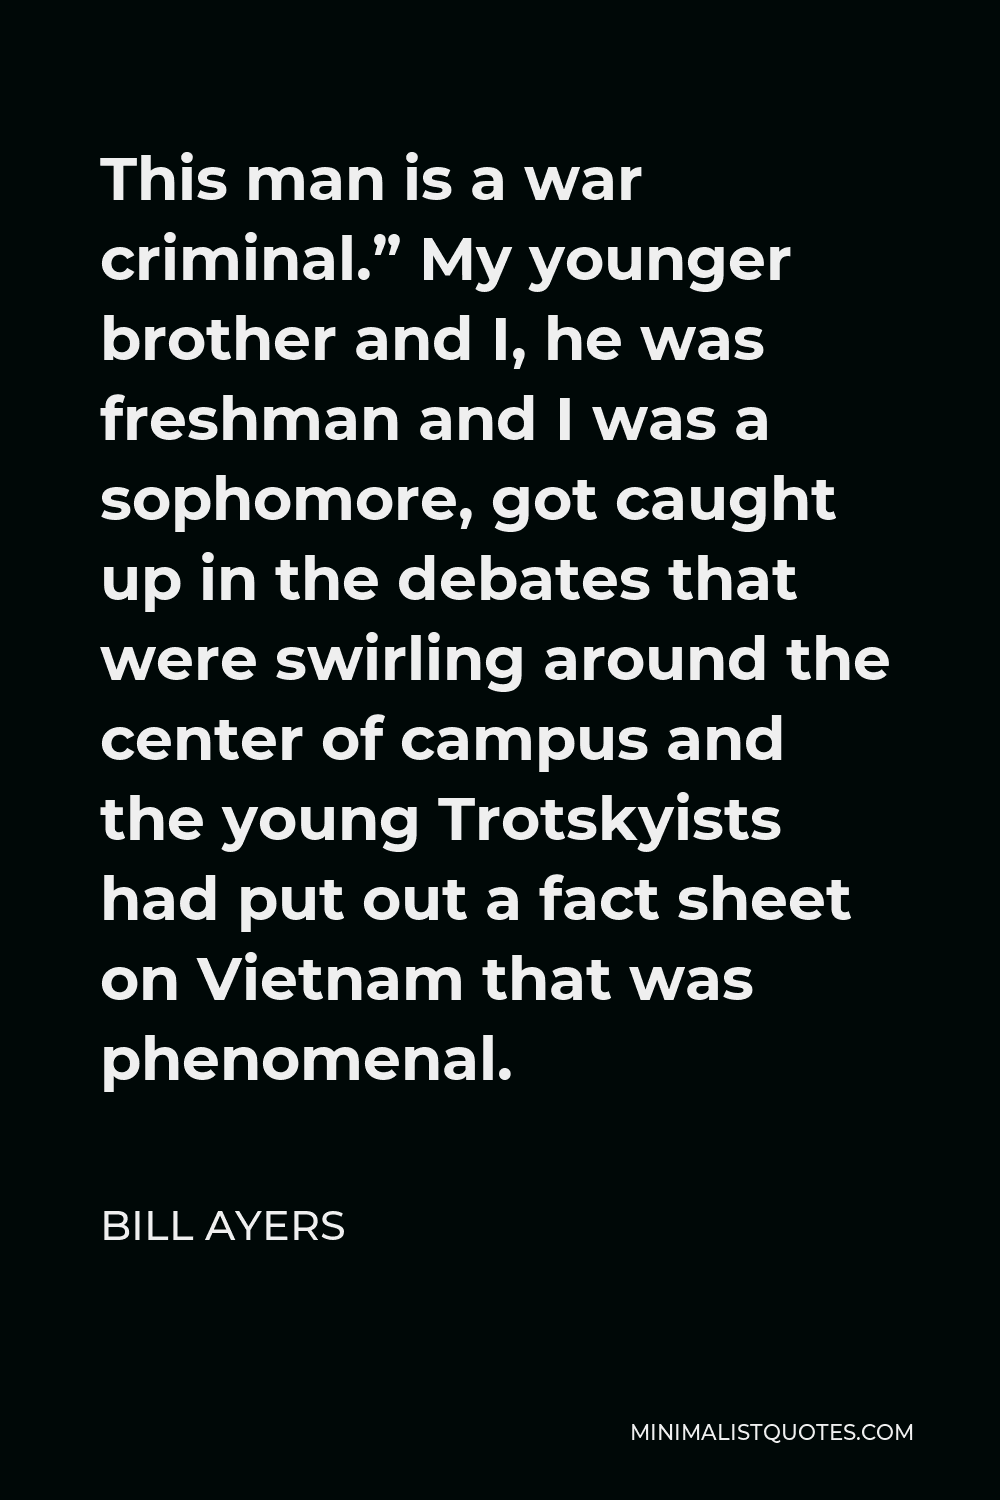 Bill Ayers Quote - This man is a war criminal.” My younger brother and I, he was freshman and I was a sophomore, got caught up in the debates that were swirling around the center of campus and the young Trotskyists had put out a fact sheet on Vietnam that was phenomenal.